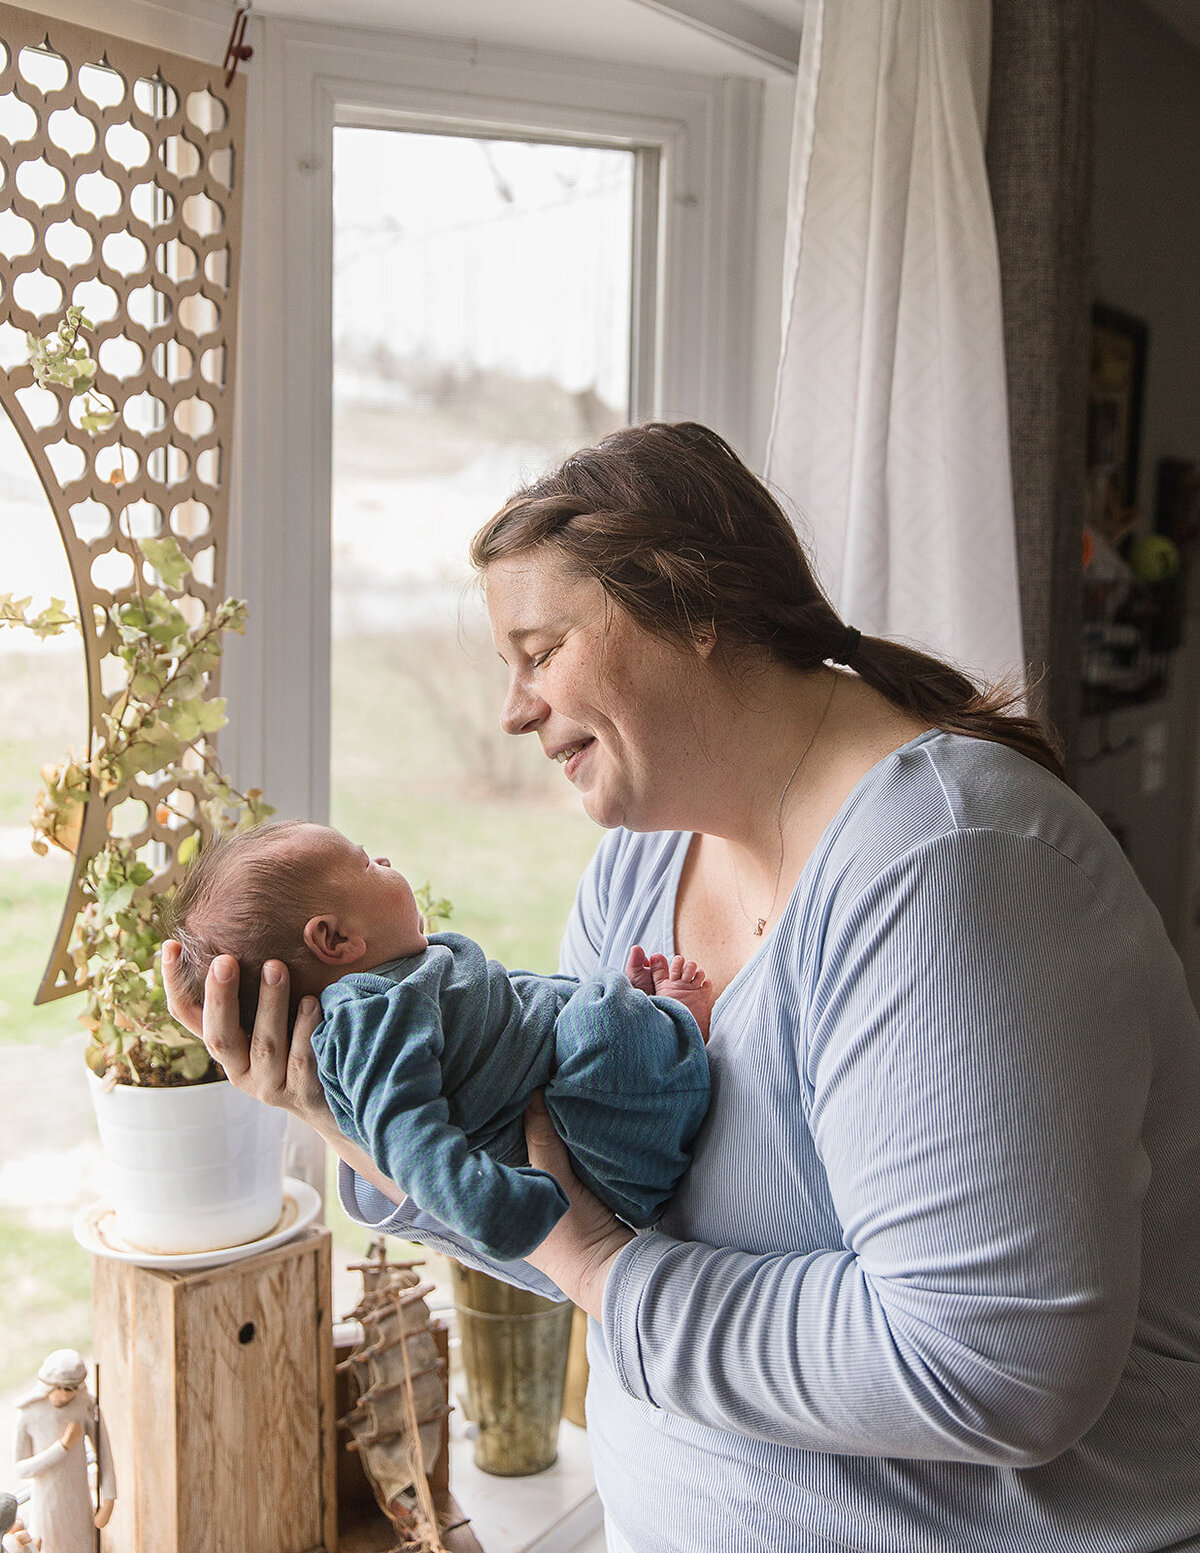 Smiling Mom Laughs at Newborn in Front of Home Window